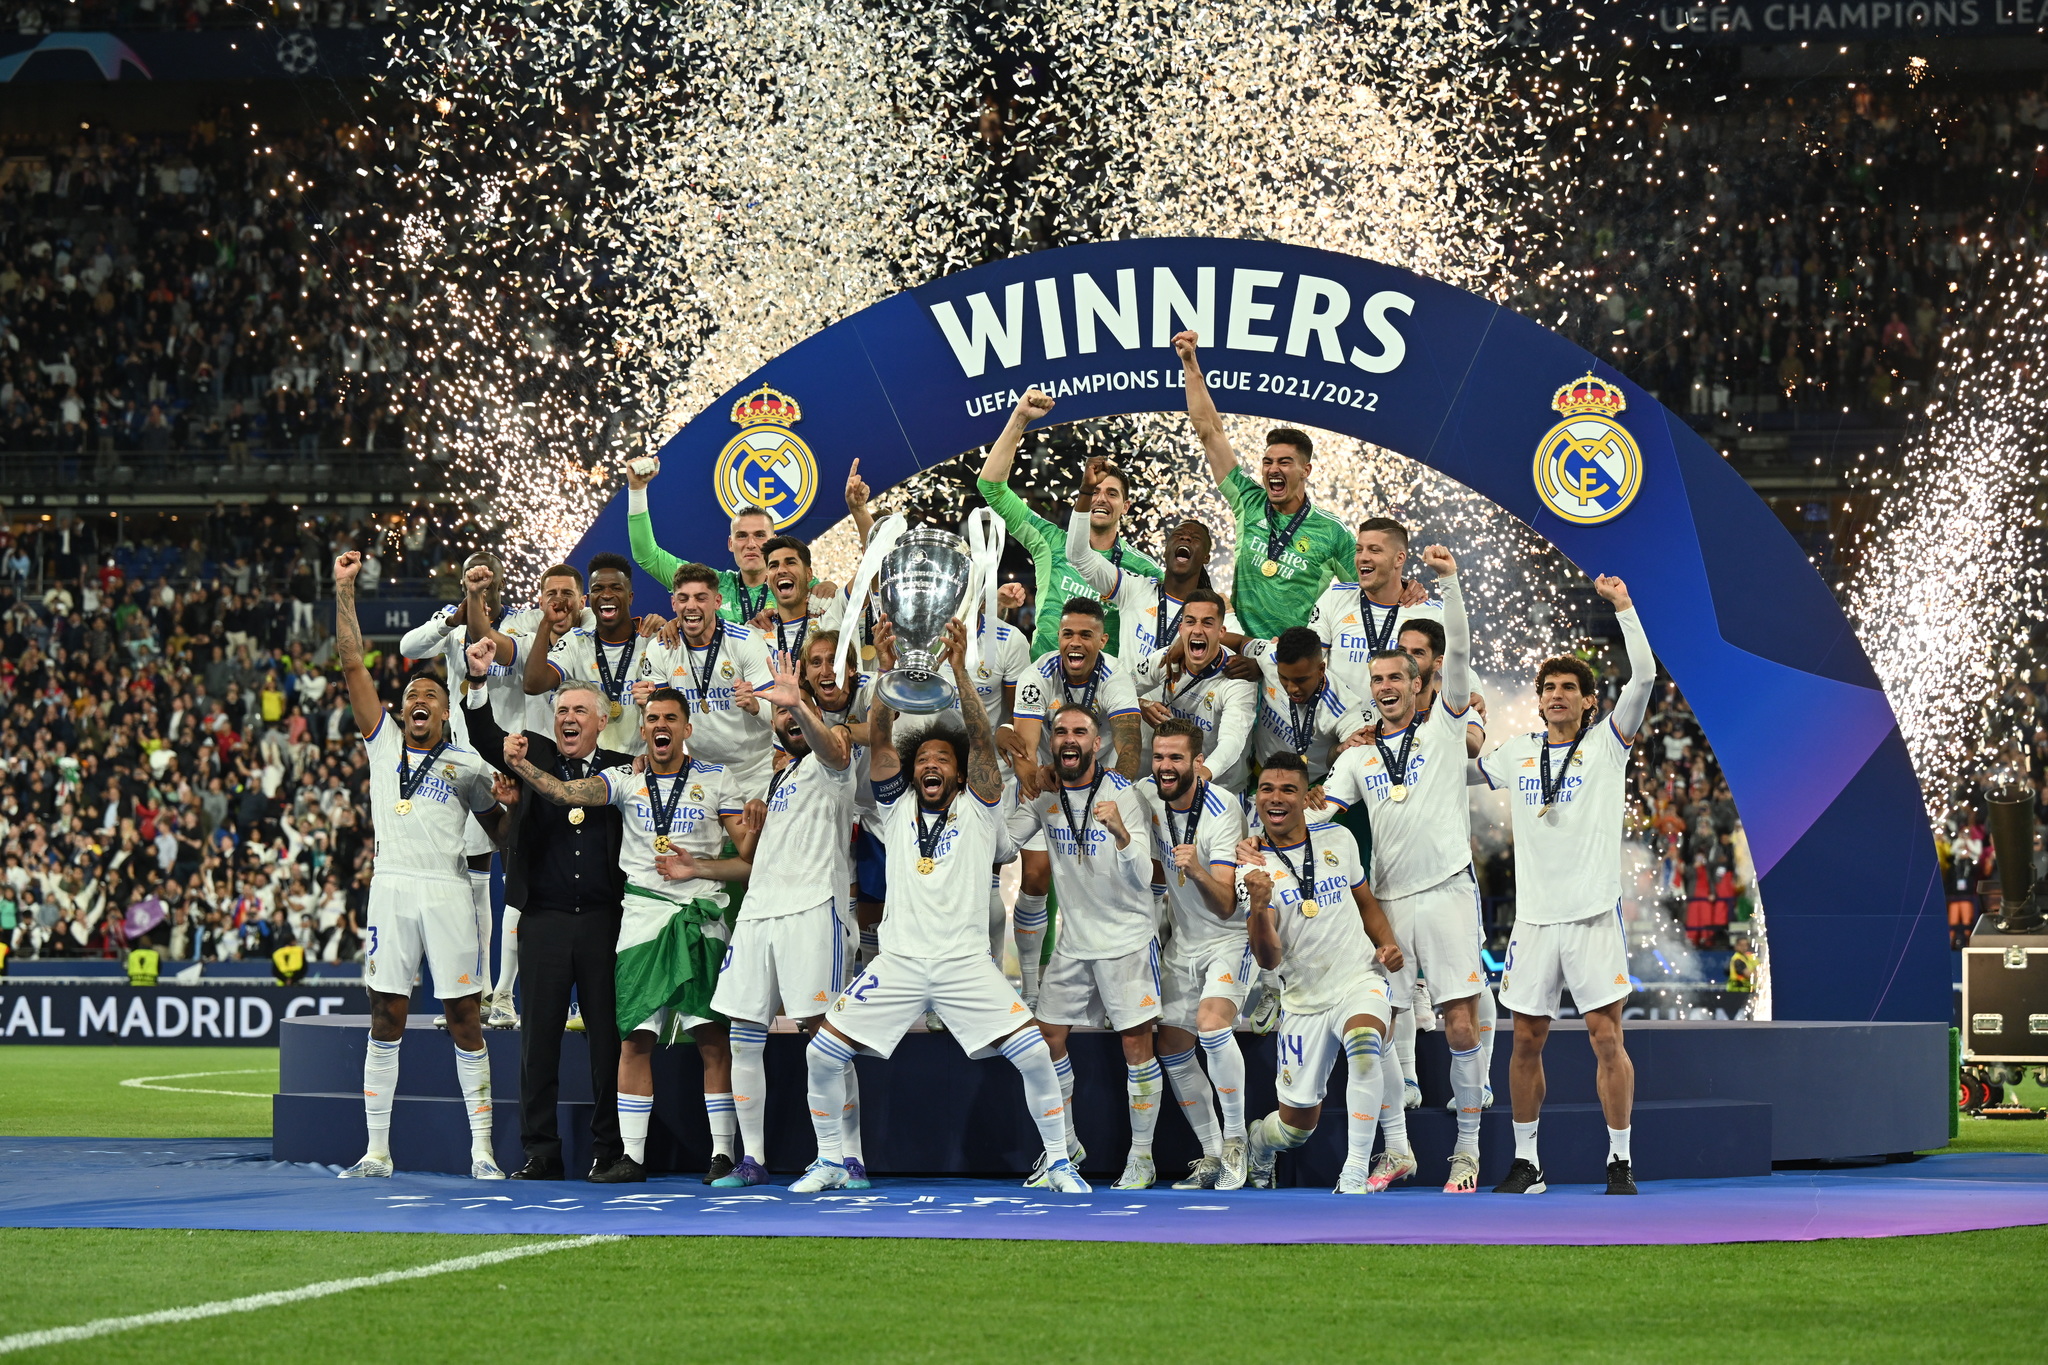 Real Madrid celebrate their 2021/22 Champions League win.